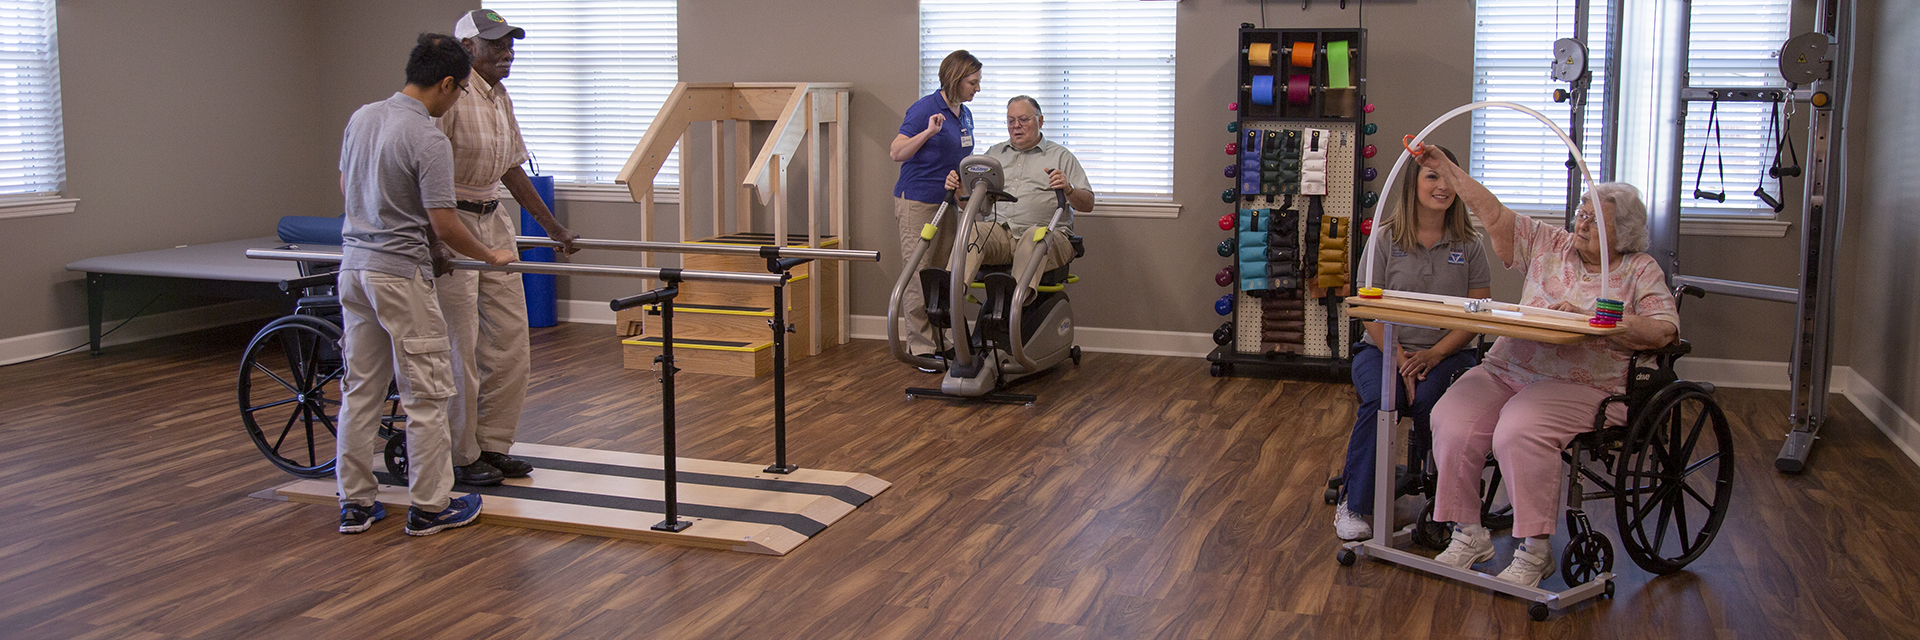 Associates aiding patients at a Rehabilitation Therapy Center with various physical therapy exercises such as walking, peddling a stationary bike, and arm movement exercises